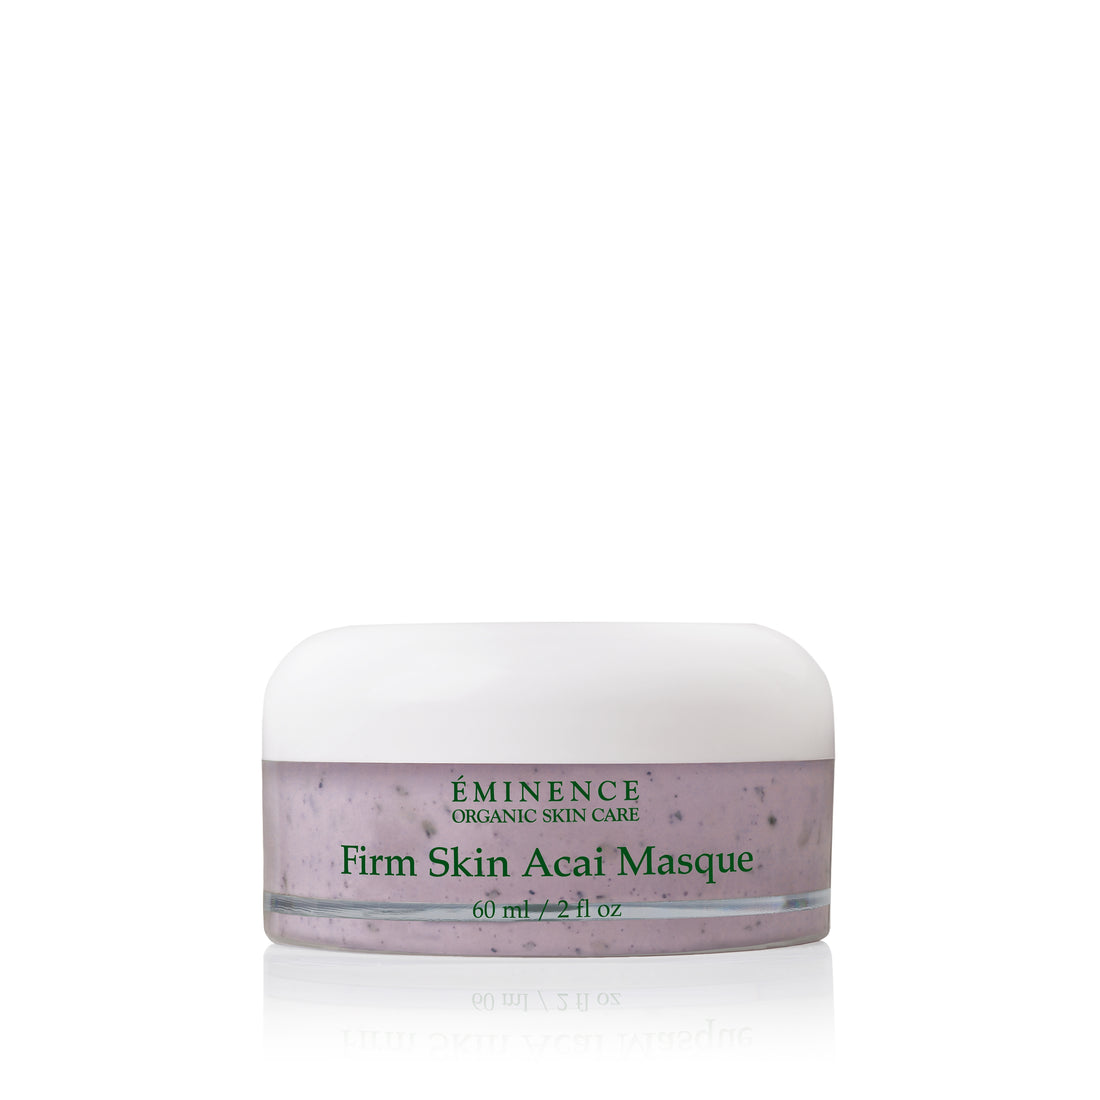 Firm Skin Acai Masque | For aging skin types